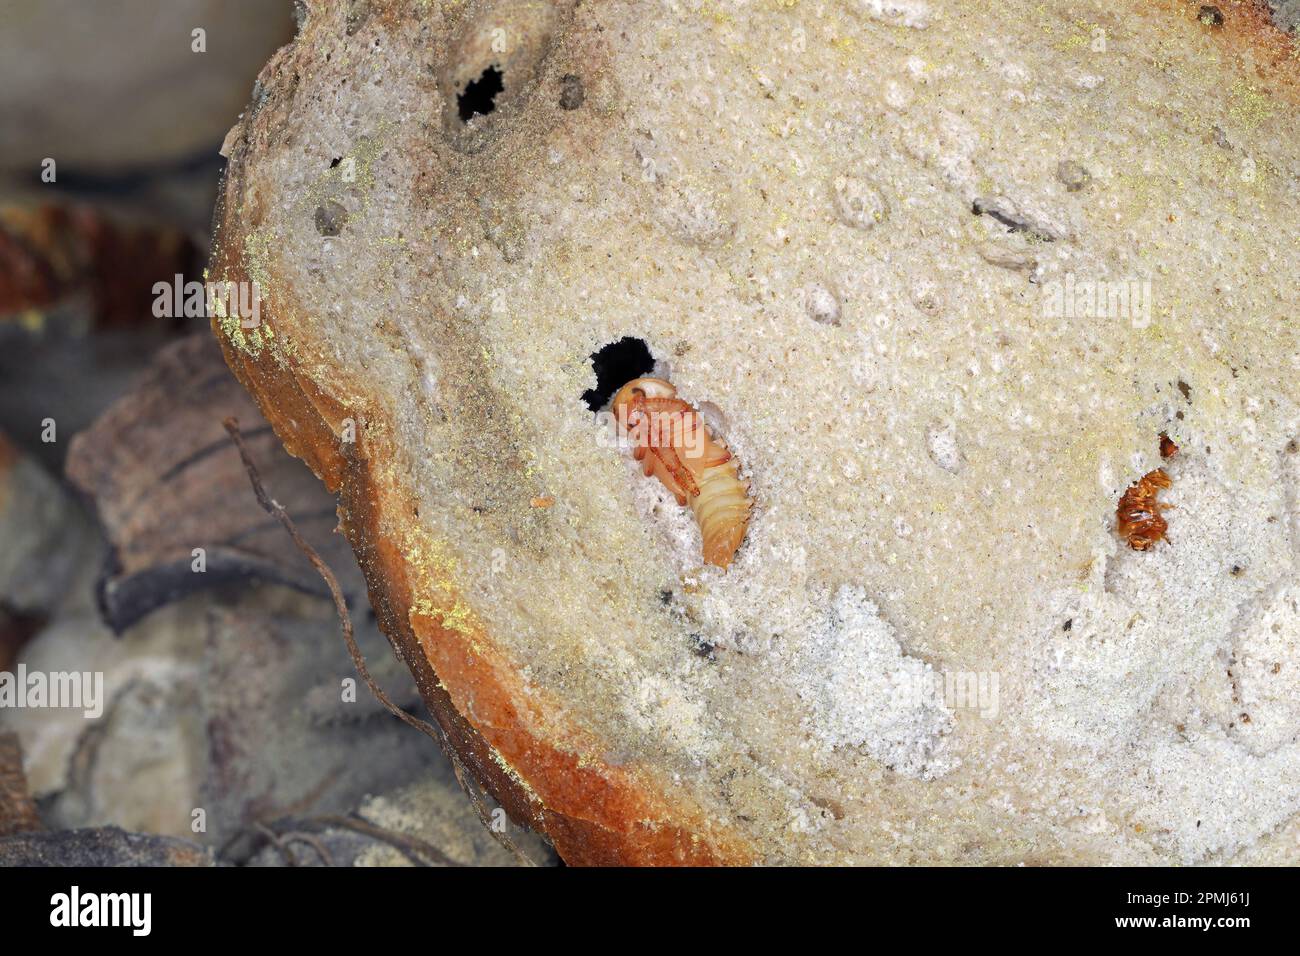 Darkling beetle Tenebrio molitor pupa in an old, dry piece of bread. Stock Photo